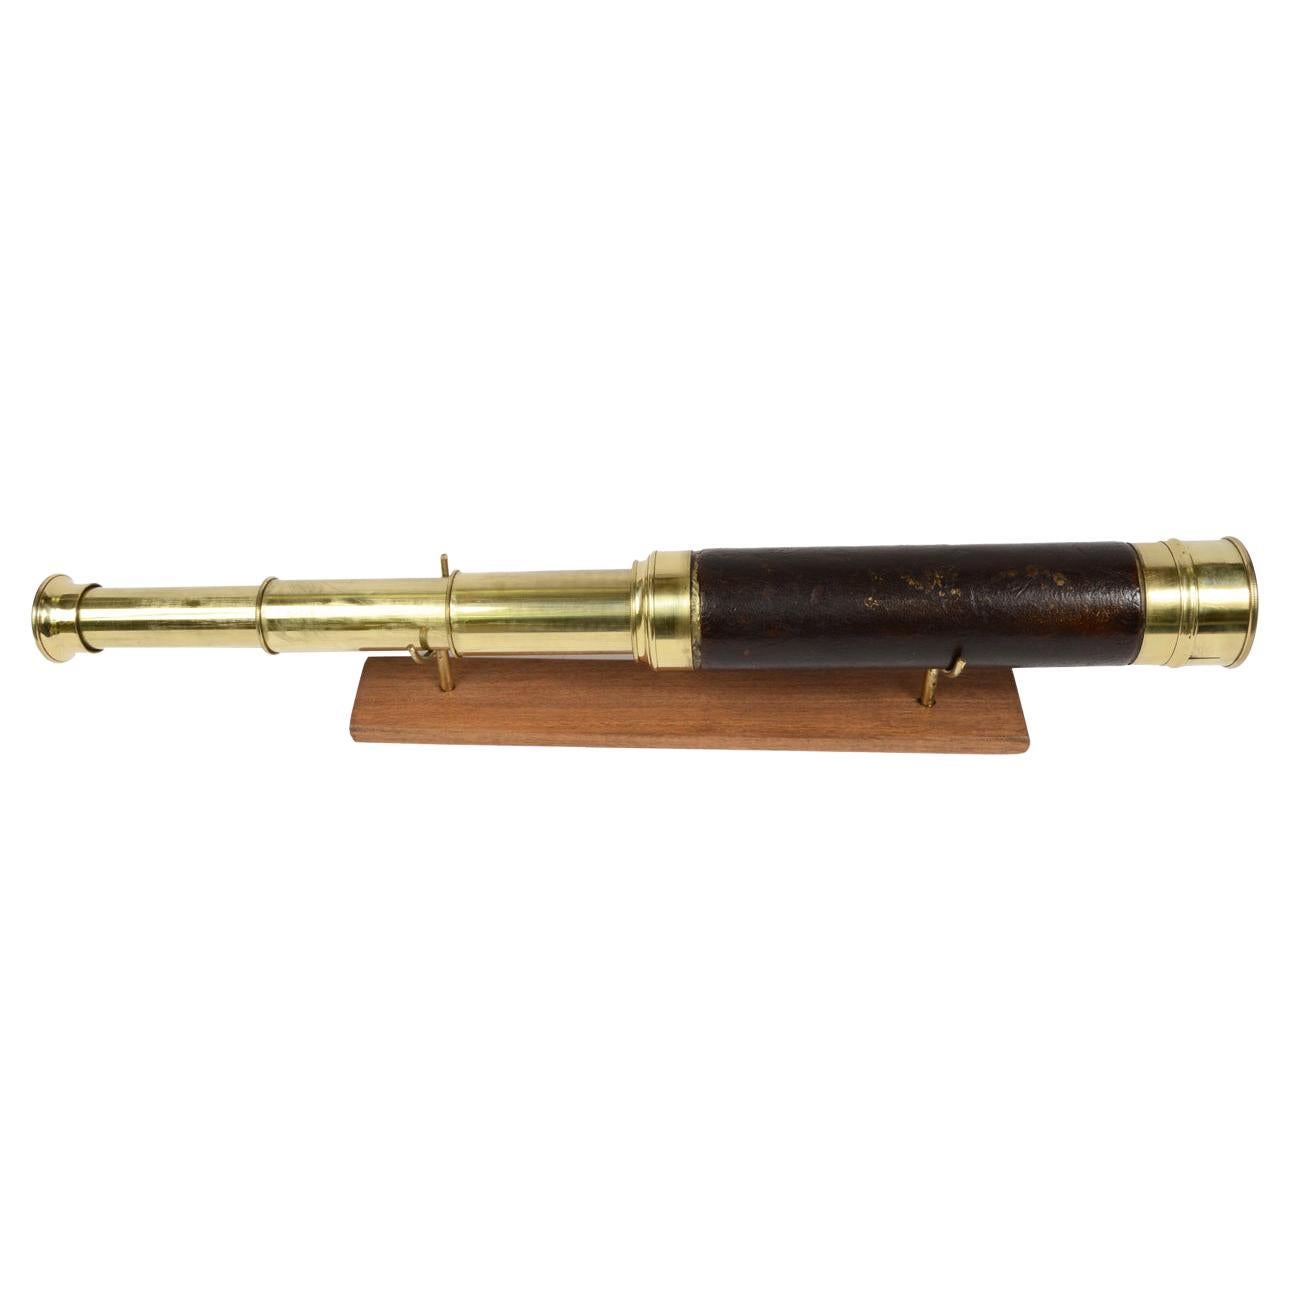 Antique Nautical Telescope, Brass and Leather, 1870